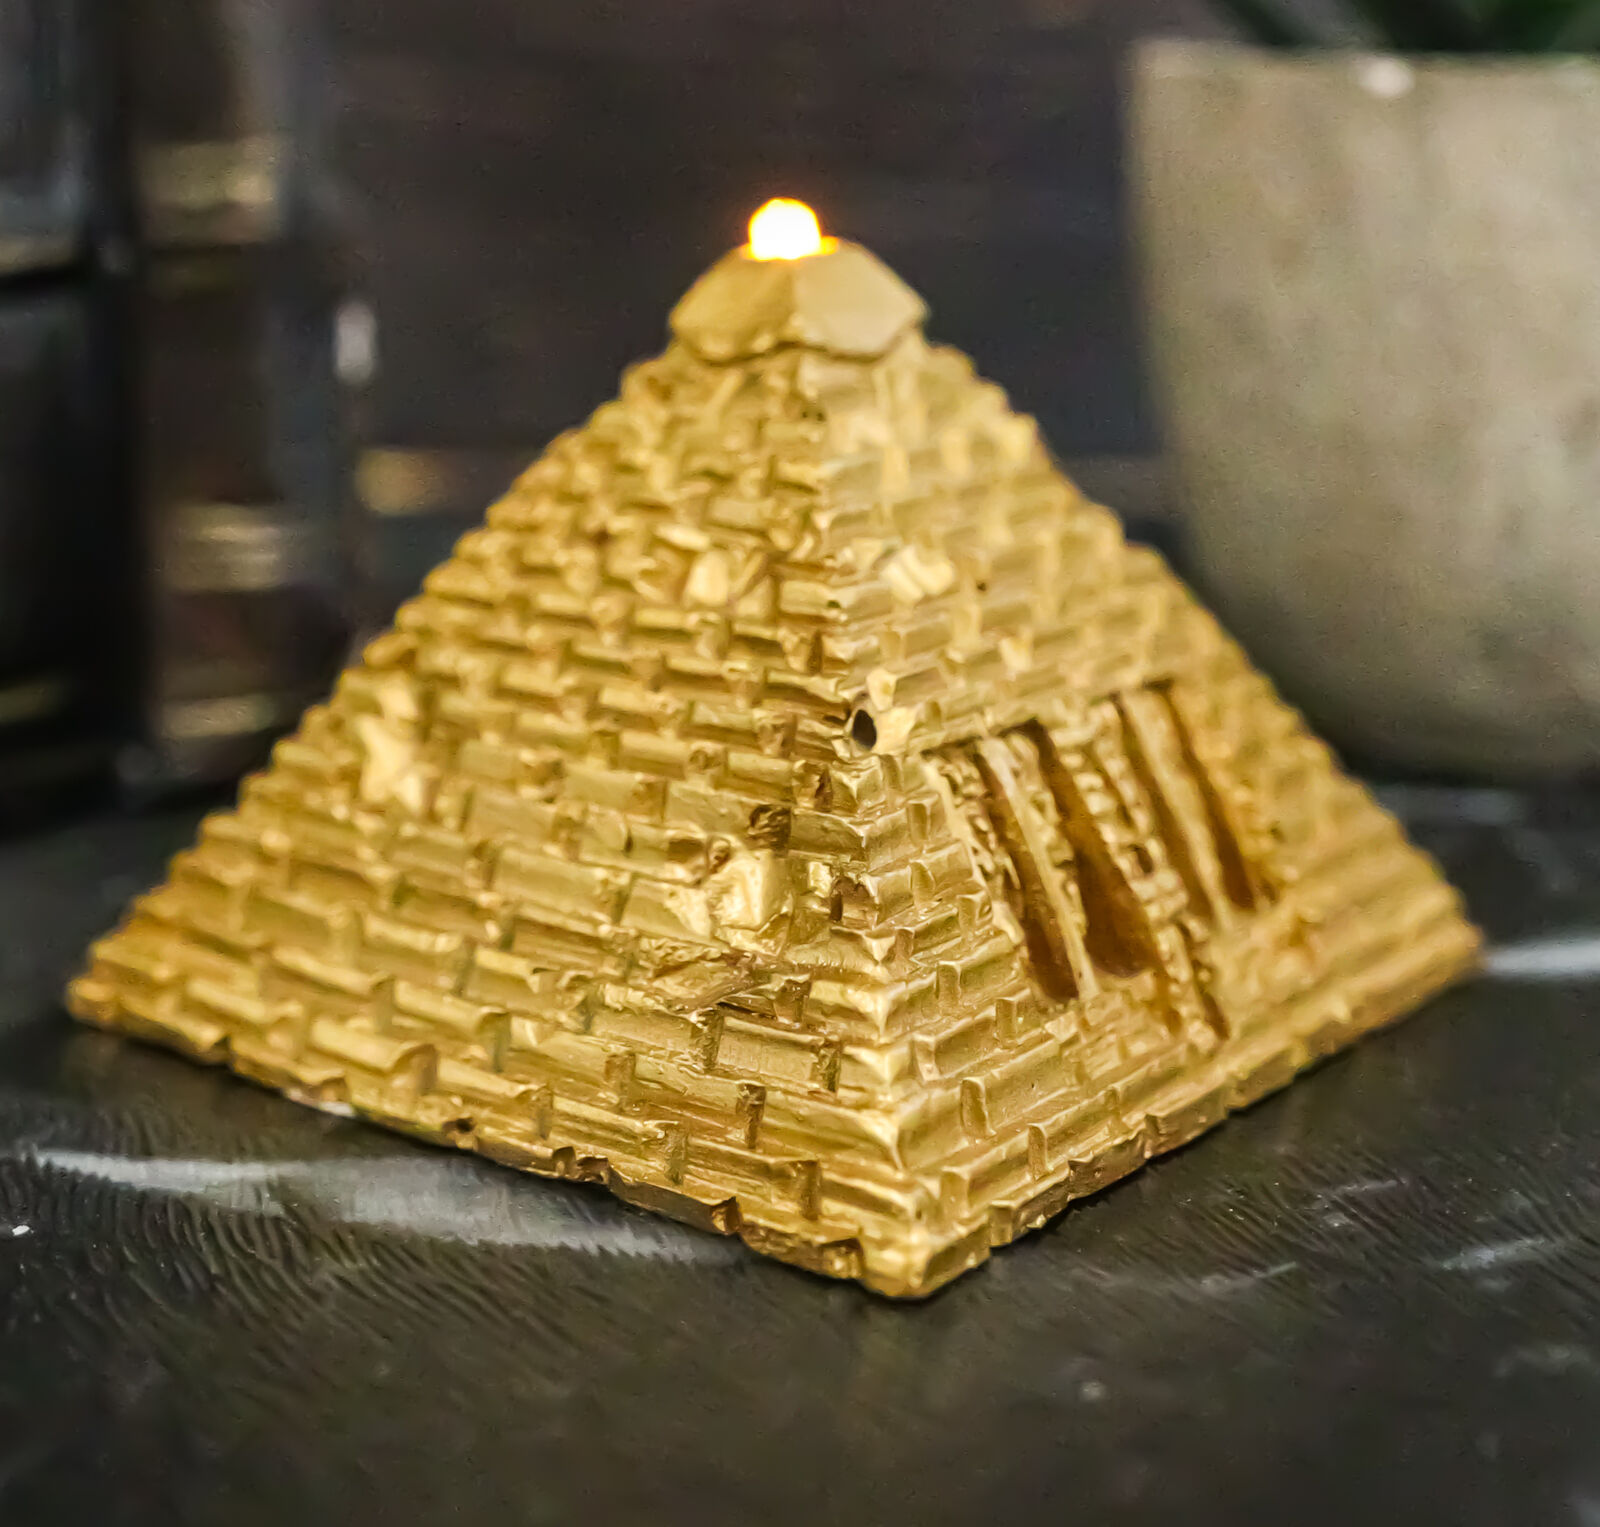 Small Golden Egyptian Giza Golden Pyramid Desk Ornament Figurine With LED Light